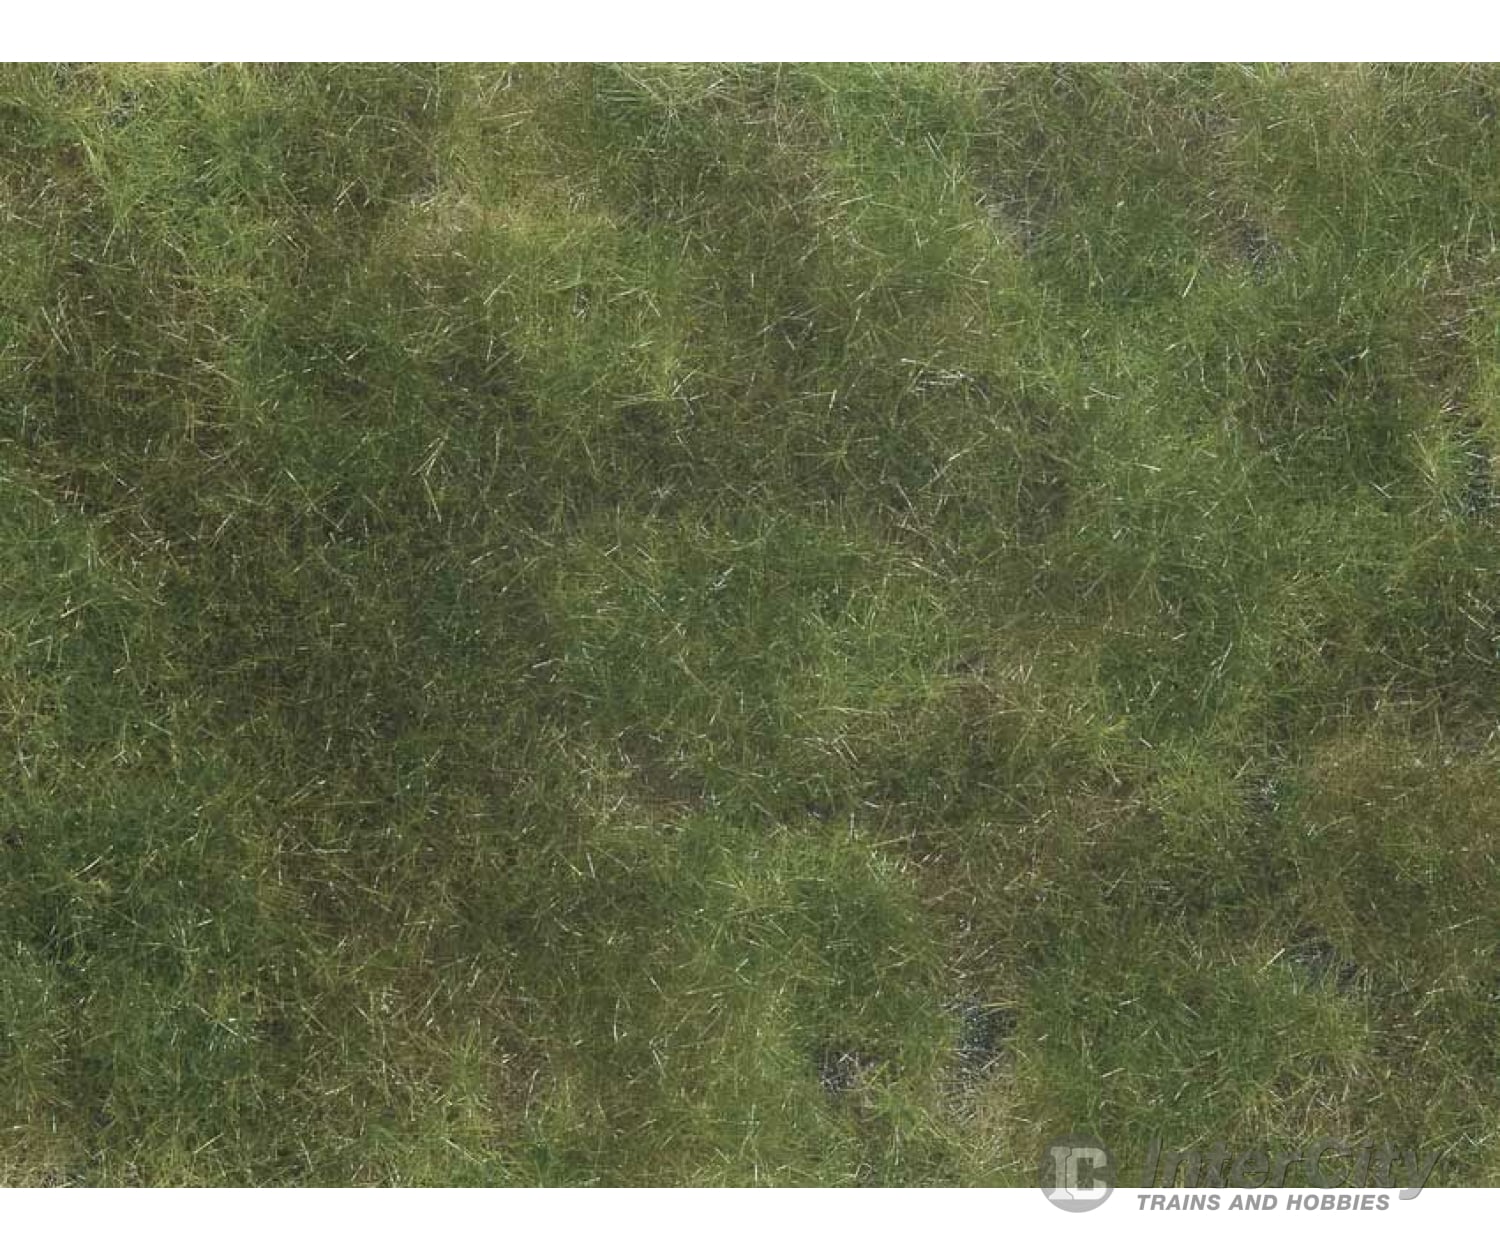 Noch 7251 Ground Cover Foliage Pad -- Olive Green 4-3/4 X 7-1/16 12 18Cm Grass & Scenery Mats